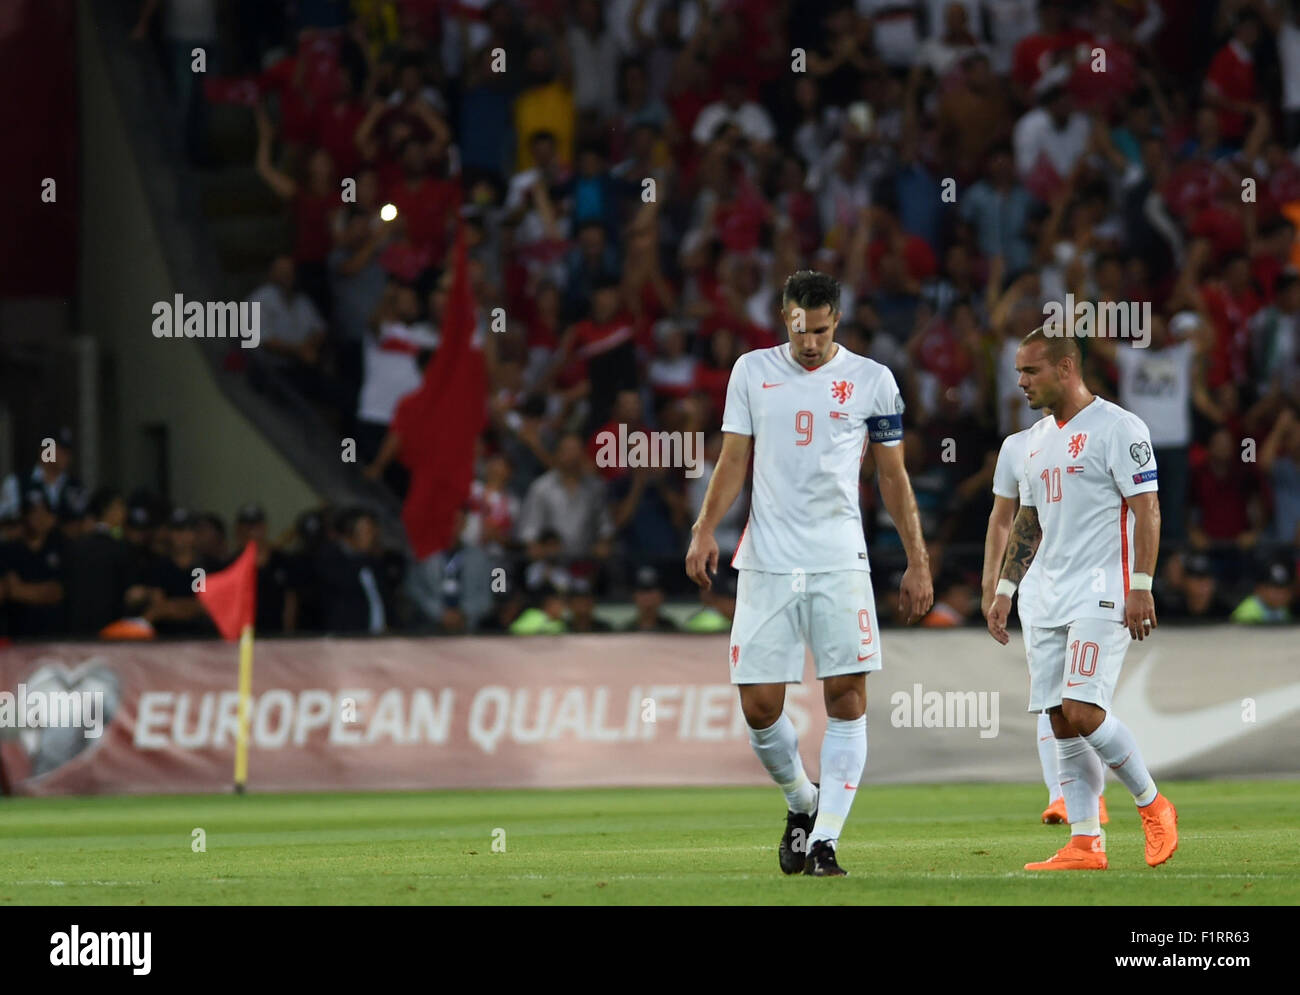 Konya, Turkey. 6th Sep, 2015. Wesley Sneijder (R) and Robin van Persie of the Netherlands react during the UEFA Euro 2016 Group A qualifying match between Turkey and the Netherlands in Konya, Turkey, on Sept. 6, 2015. The Netherlands lost 0-3. Credit:  He Canling/Xinhua/Alamy Live News Stock Photo